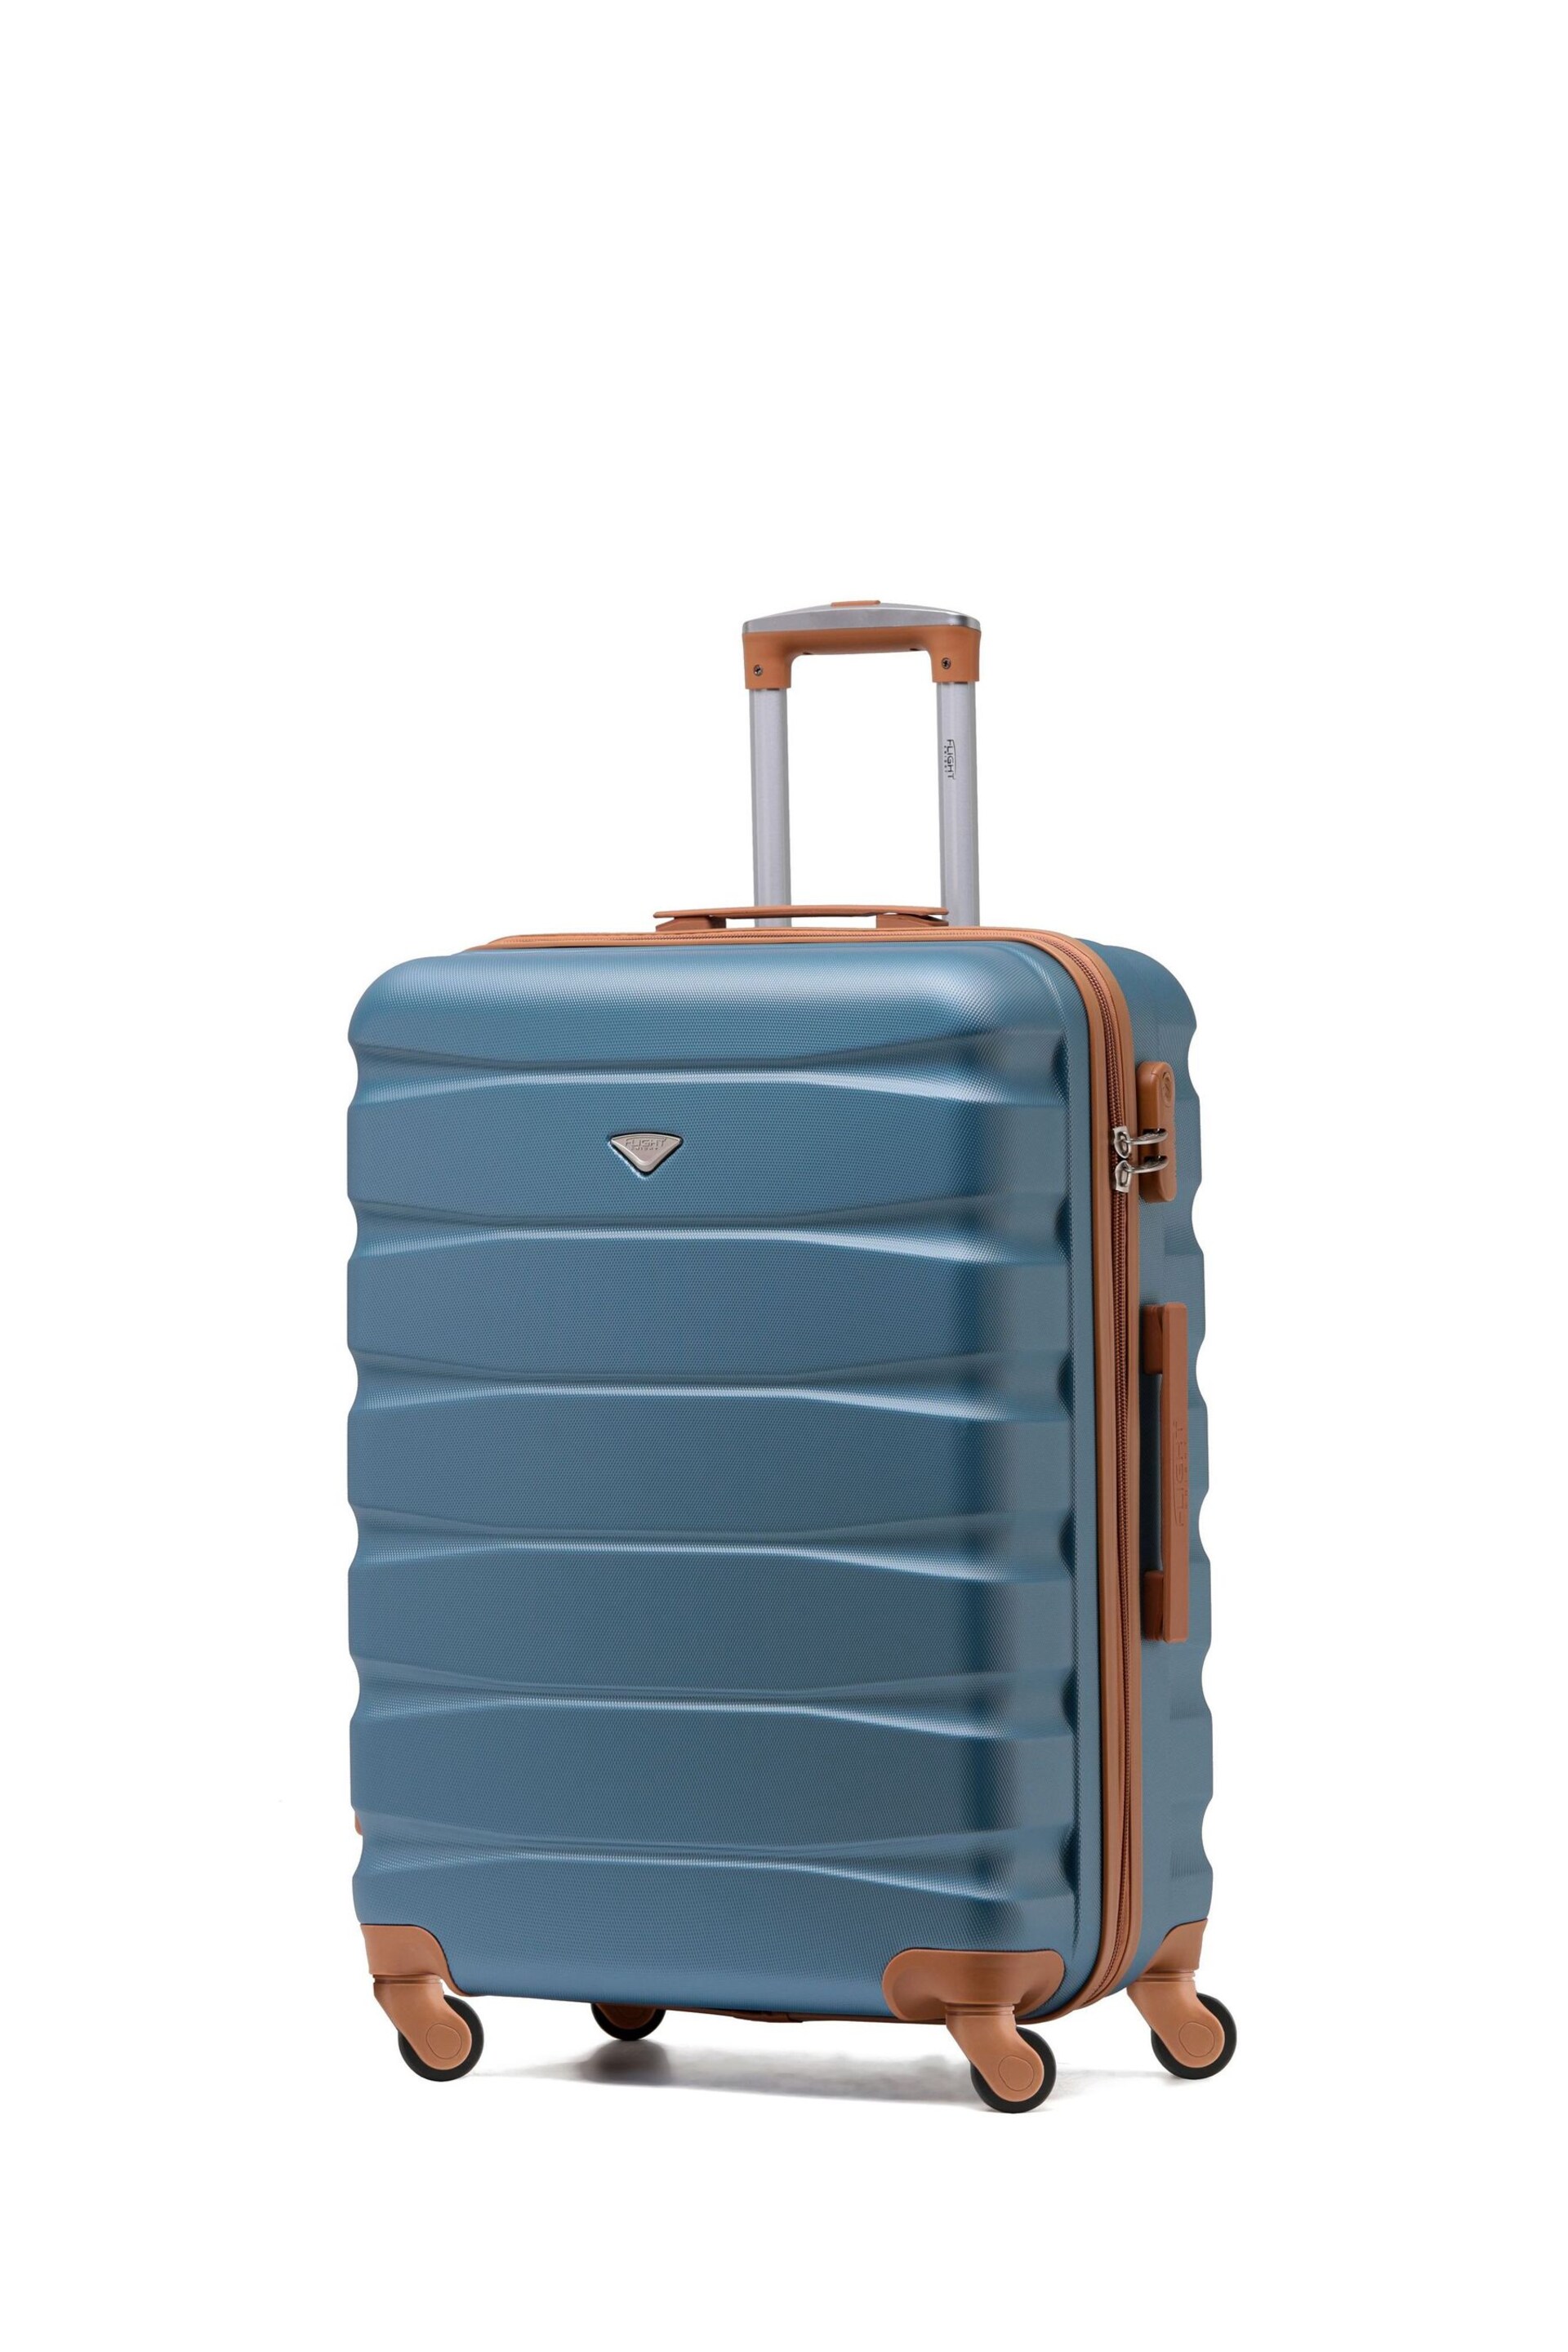 Flight Knight Blue/Tan Medium Hardcase Lightweight Check In Suitcase With 4 Wheels - Image 1 of 7